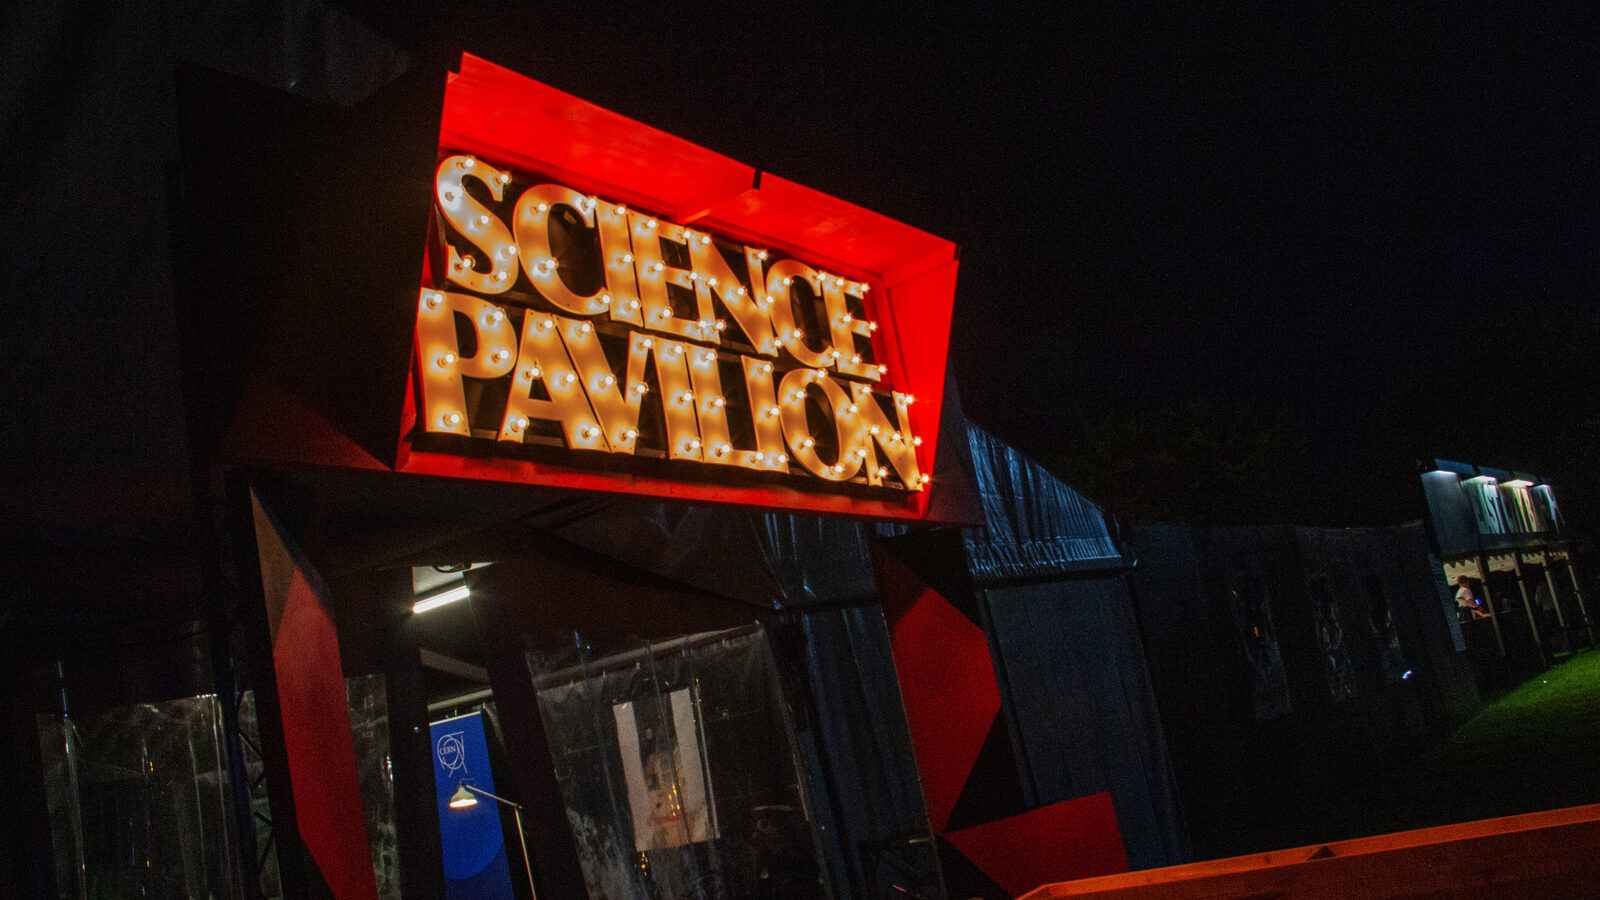 "Science Pavilion" in illuminated letters